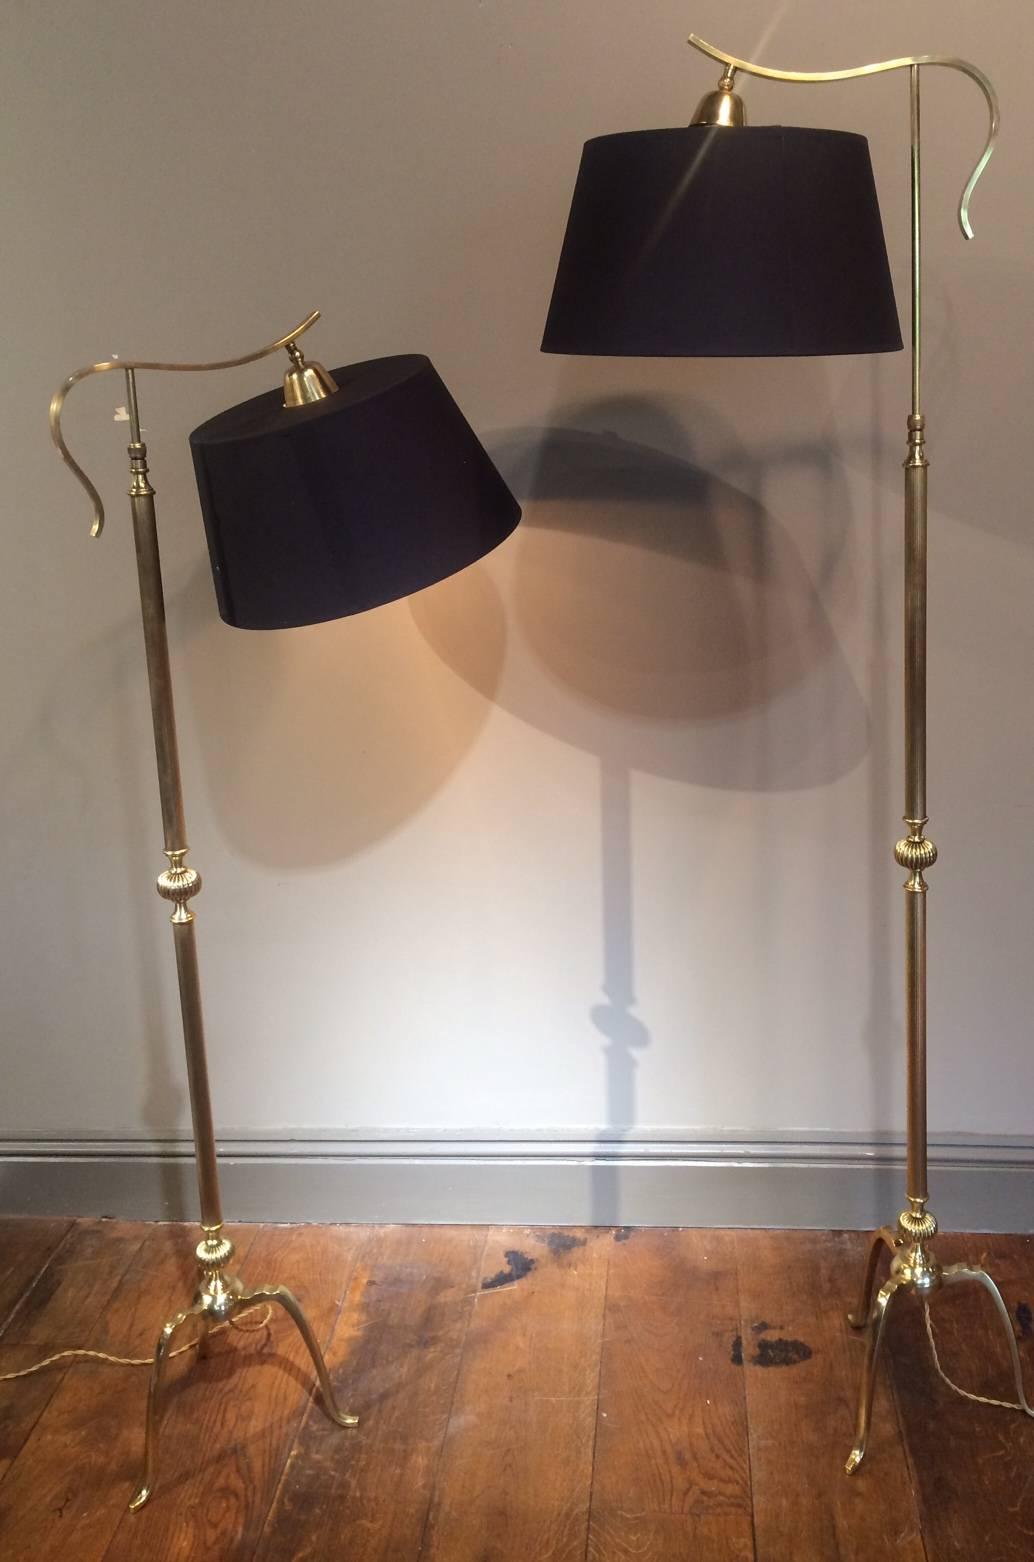 Pair of Adjustable Brass Overhanging Reading Lamps In Excellent Condition For Sale In Shrewsbury, GB